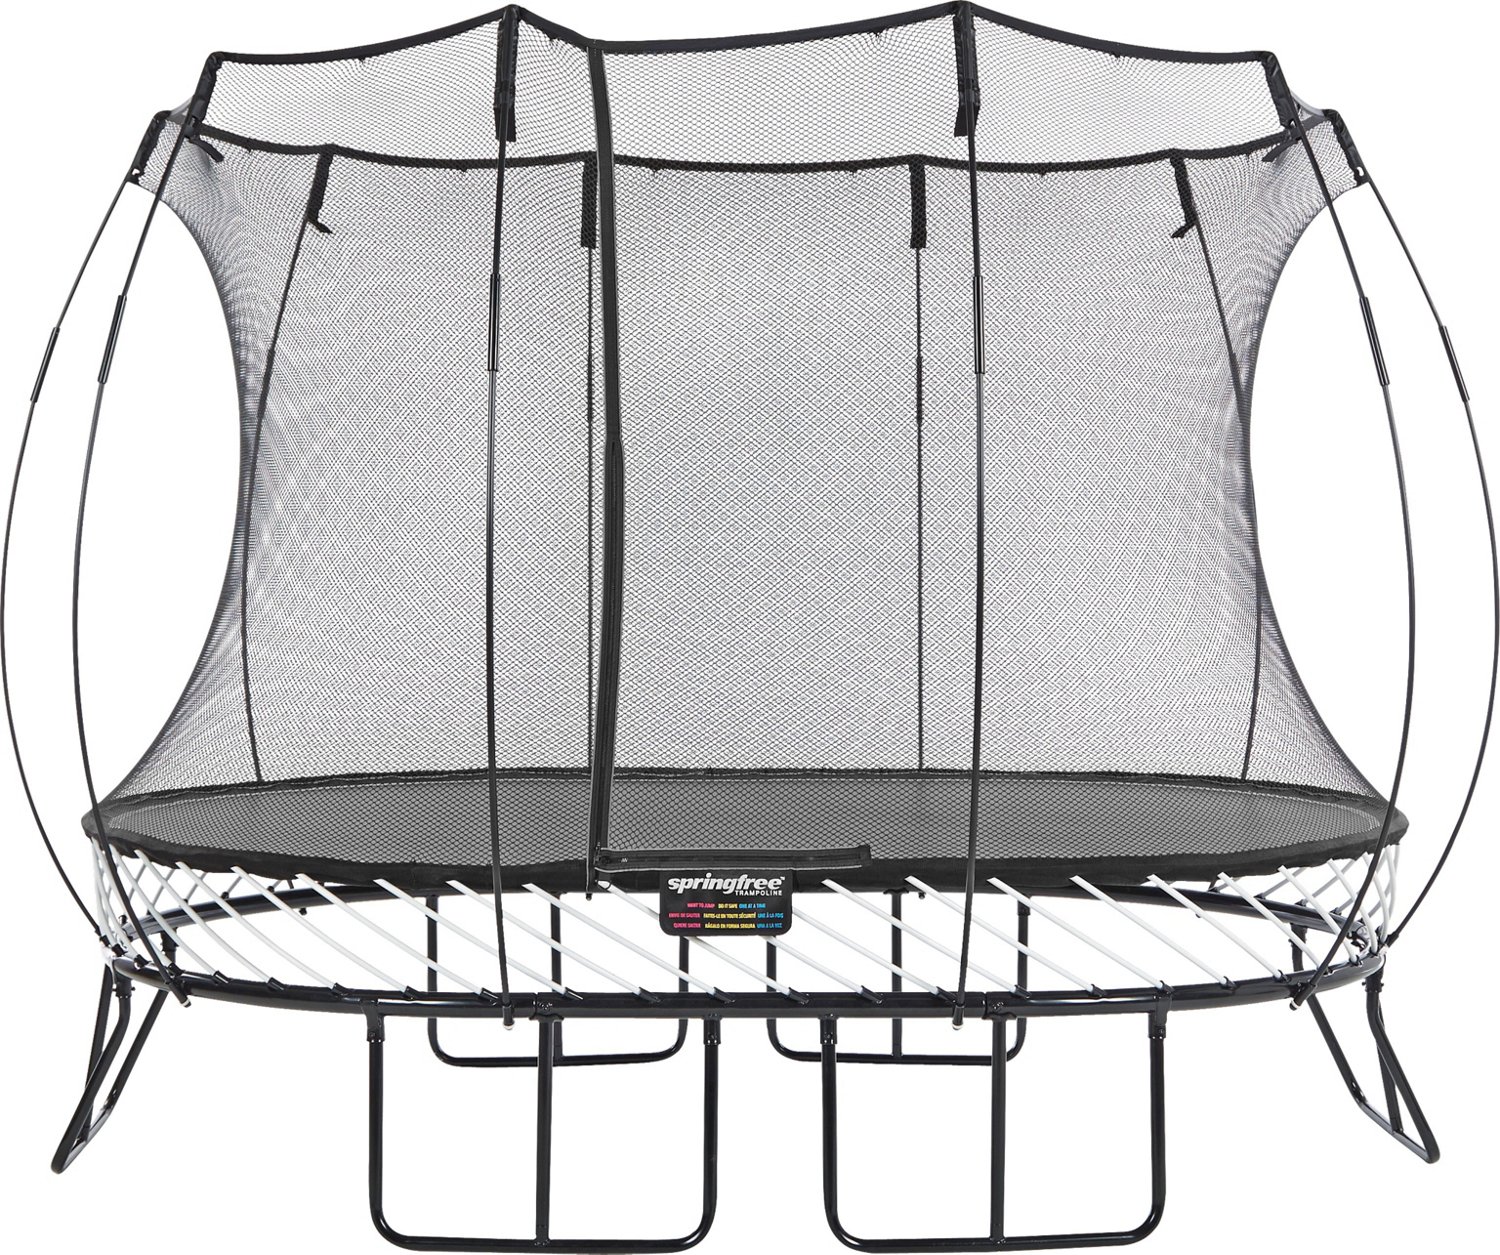 Springfree Medium Oval Trampoline                                                                                                - view number 1 selected